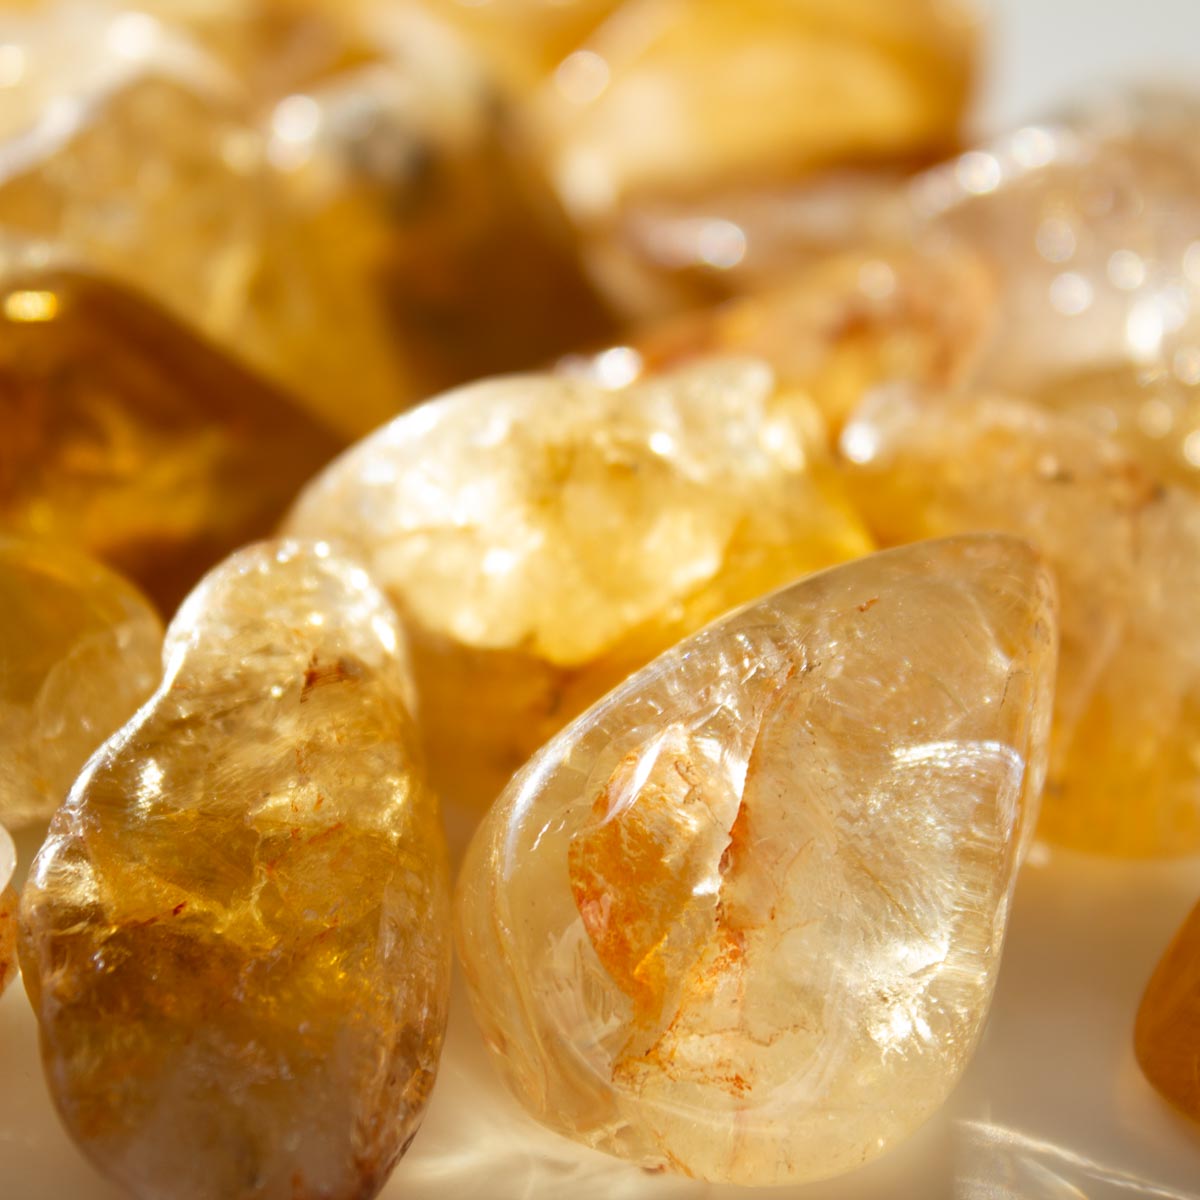 Citrine Crystal for Happiness, Prosperity, and Abundance